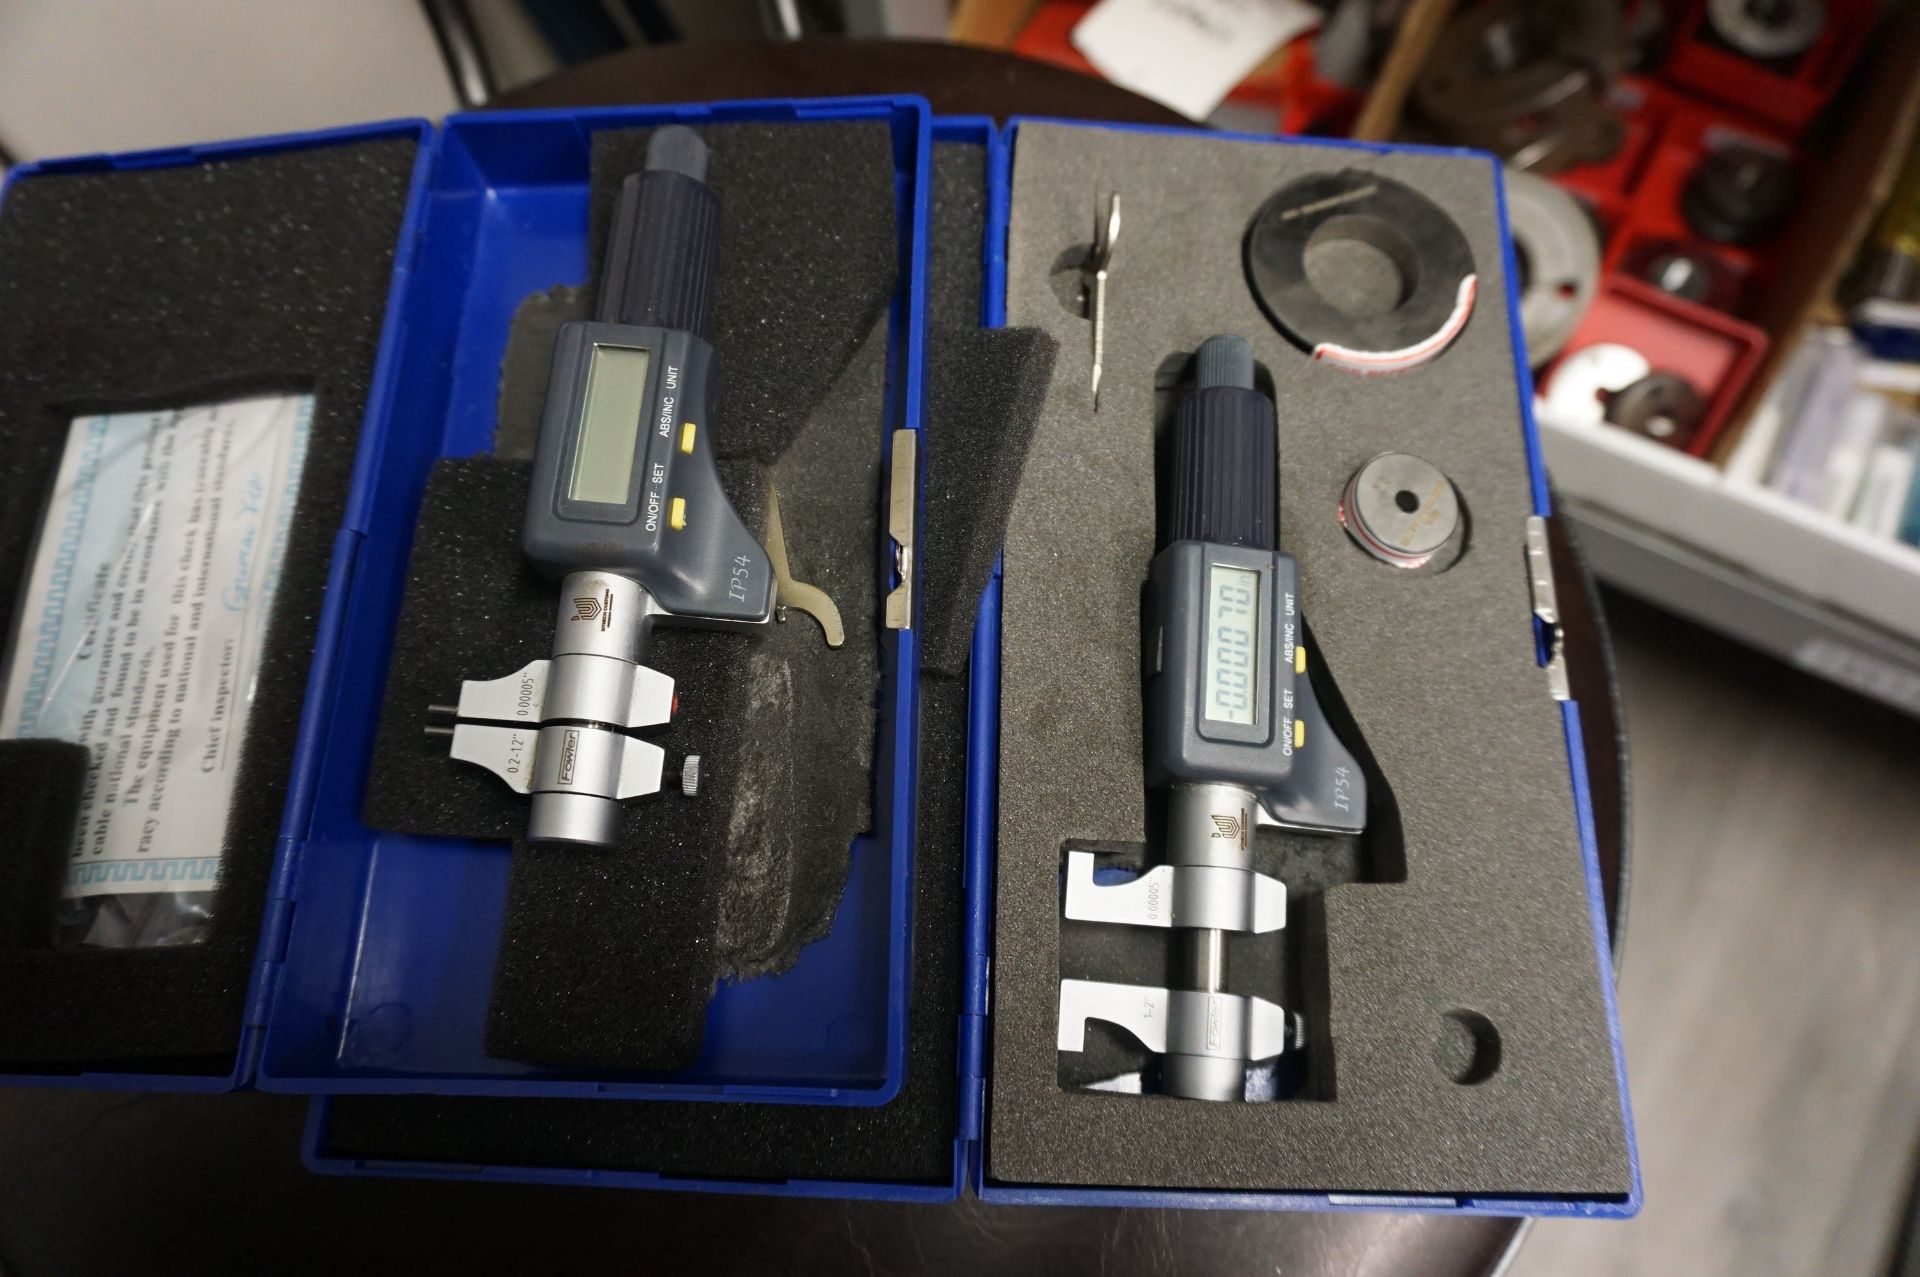 LOT TO INCLUDE: (1) FOWLER DIGITAL INSIDE MICROMETER 0.2-1.2"1P54, (1) FOWLER DIGITAL INSIDE